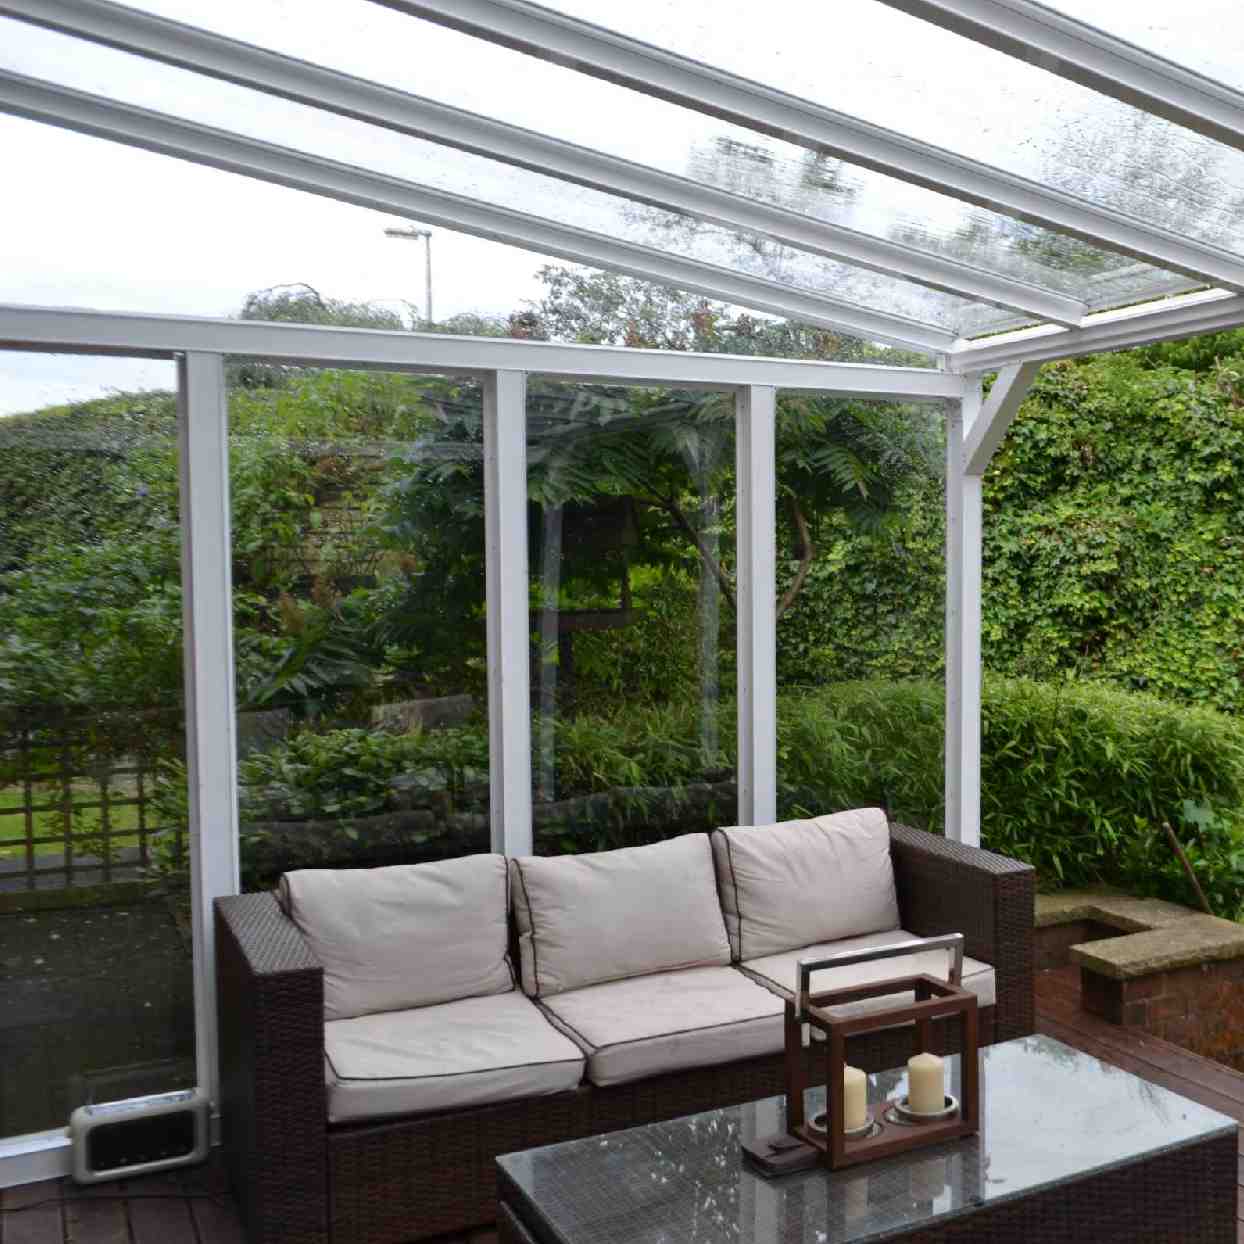 Buy Omega Verandah White with 6mm Glass Clear Plate Polycarbonate Glazing - 5.2m (W) x 4.0m (P), (3) Supporting Posts online today